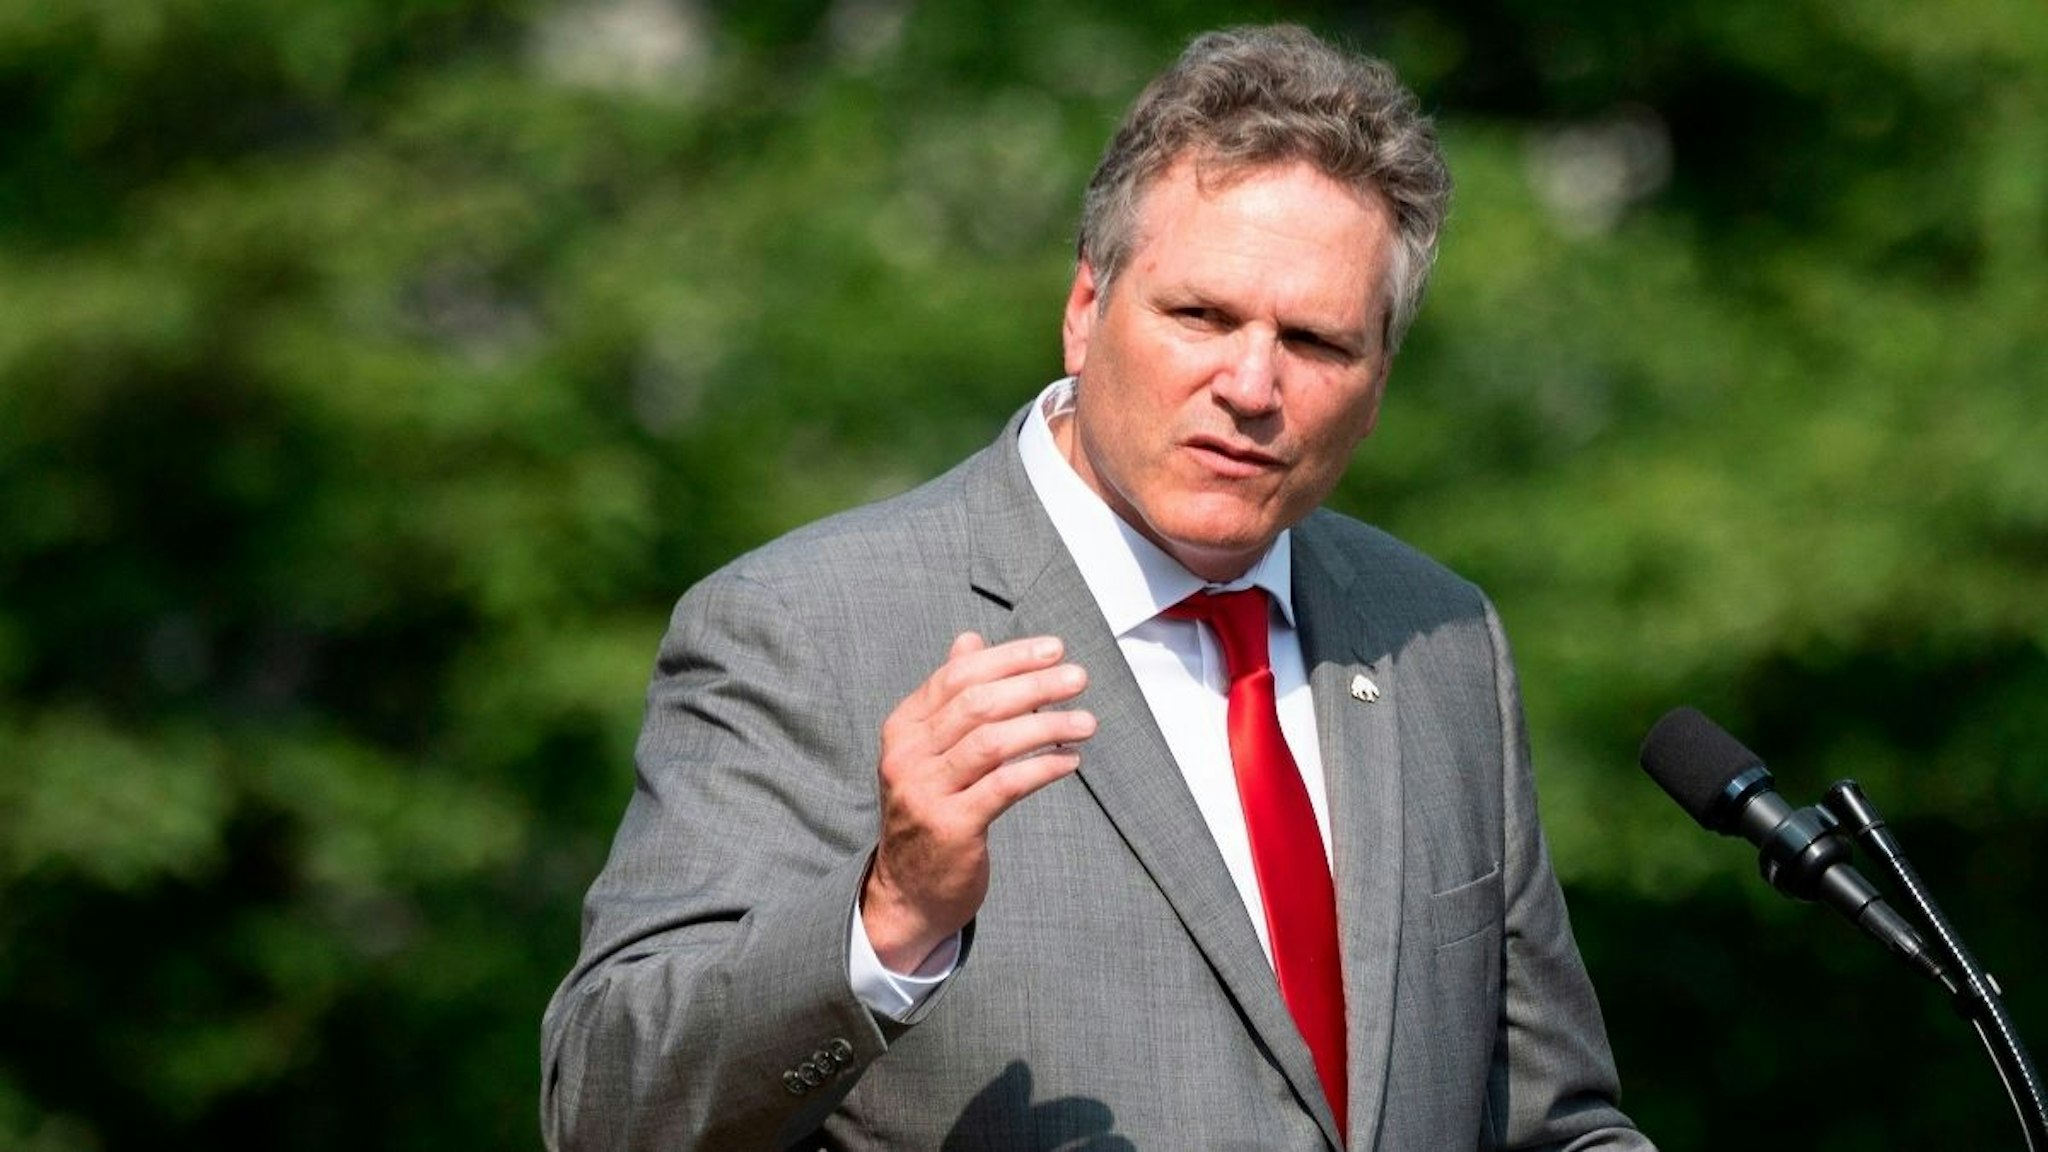 Alaska Governor Mike Dunleavy (R-AK) speaks at the White House in Washington, DC, on July 16, 2020, during an event on Rolling Back Regulations to Help All Americans on the South Lawn at the White House on July 16, 2020 in Washington,DC.